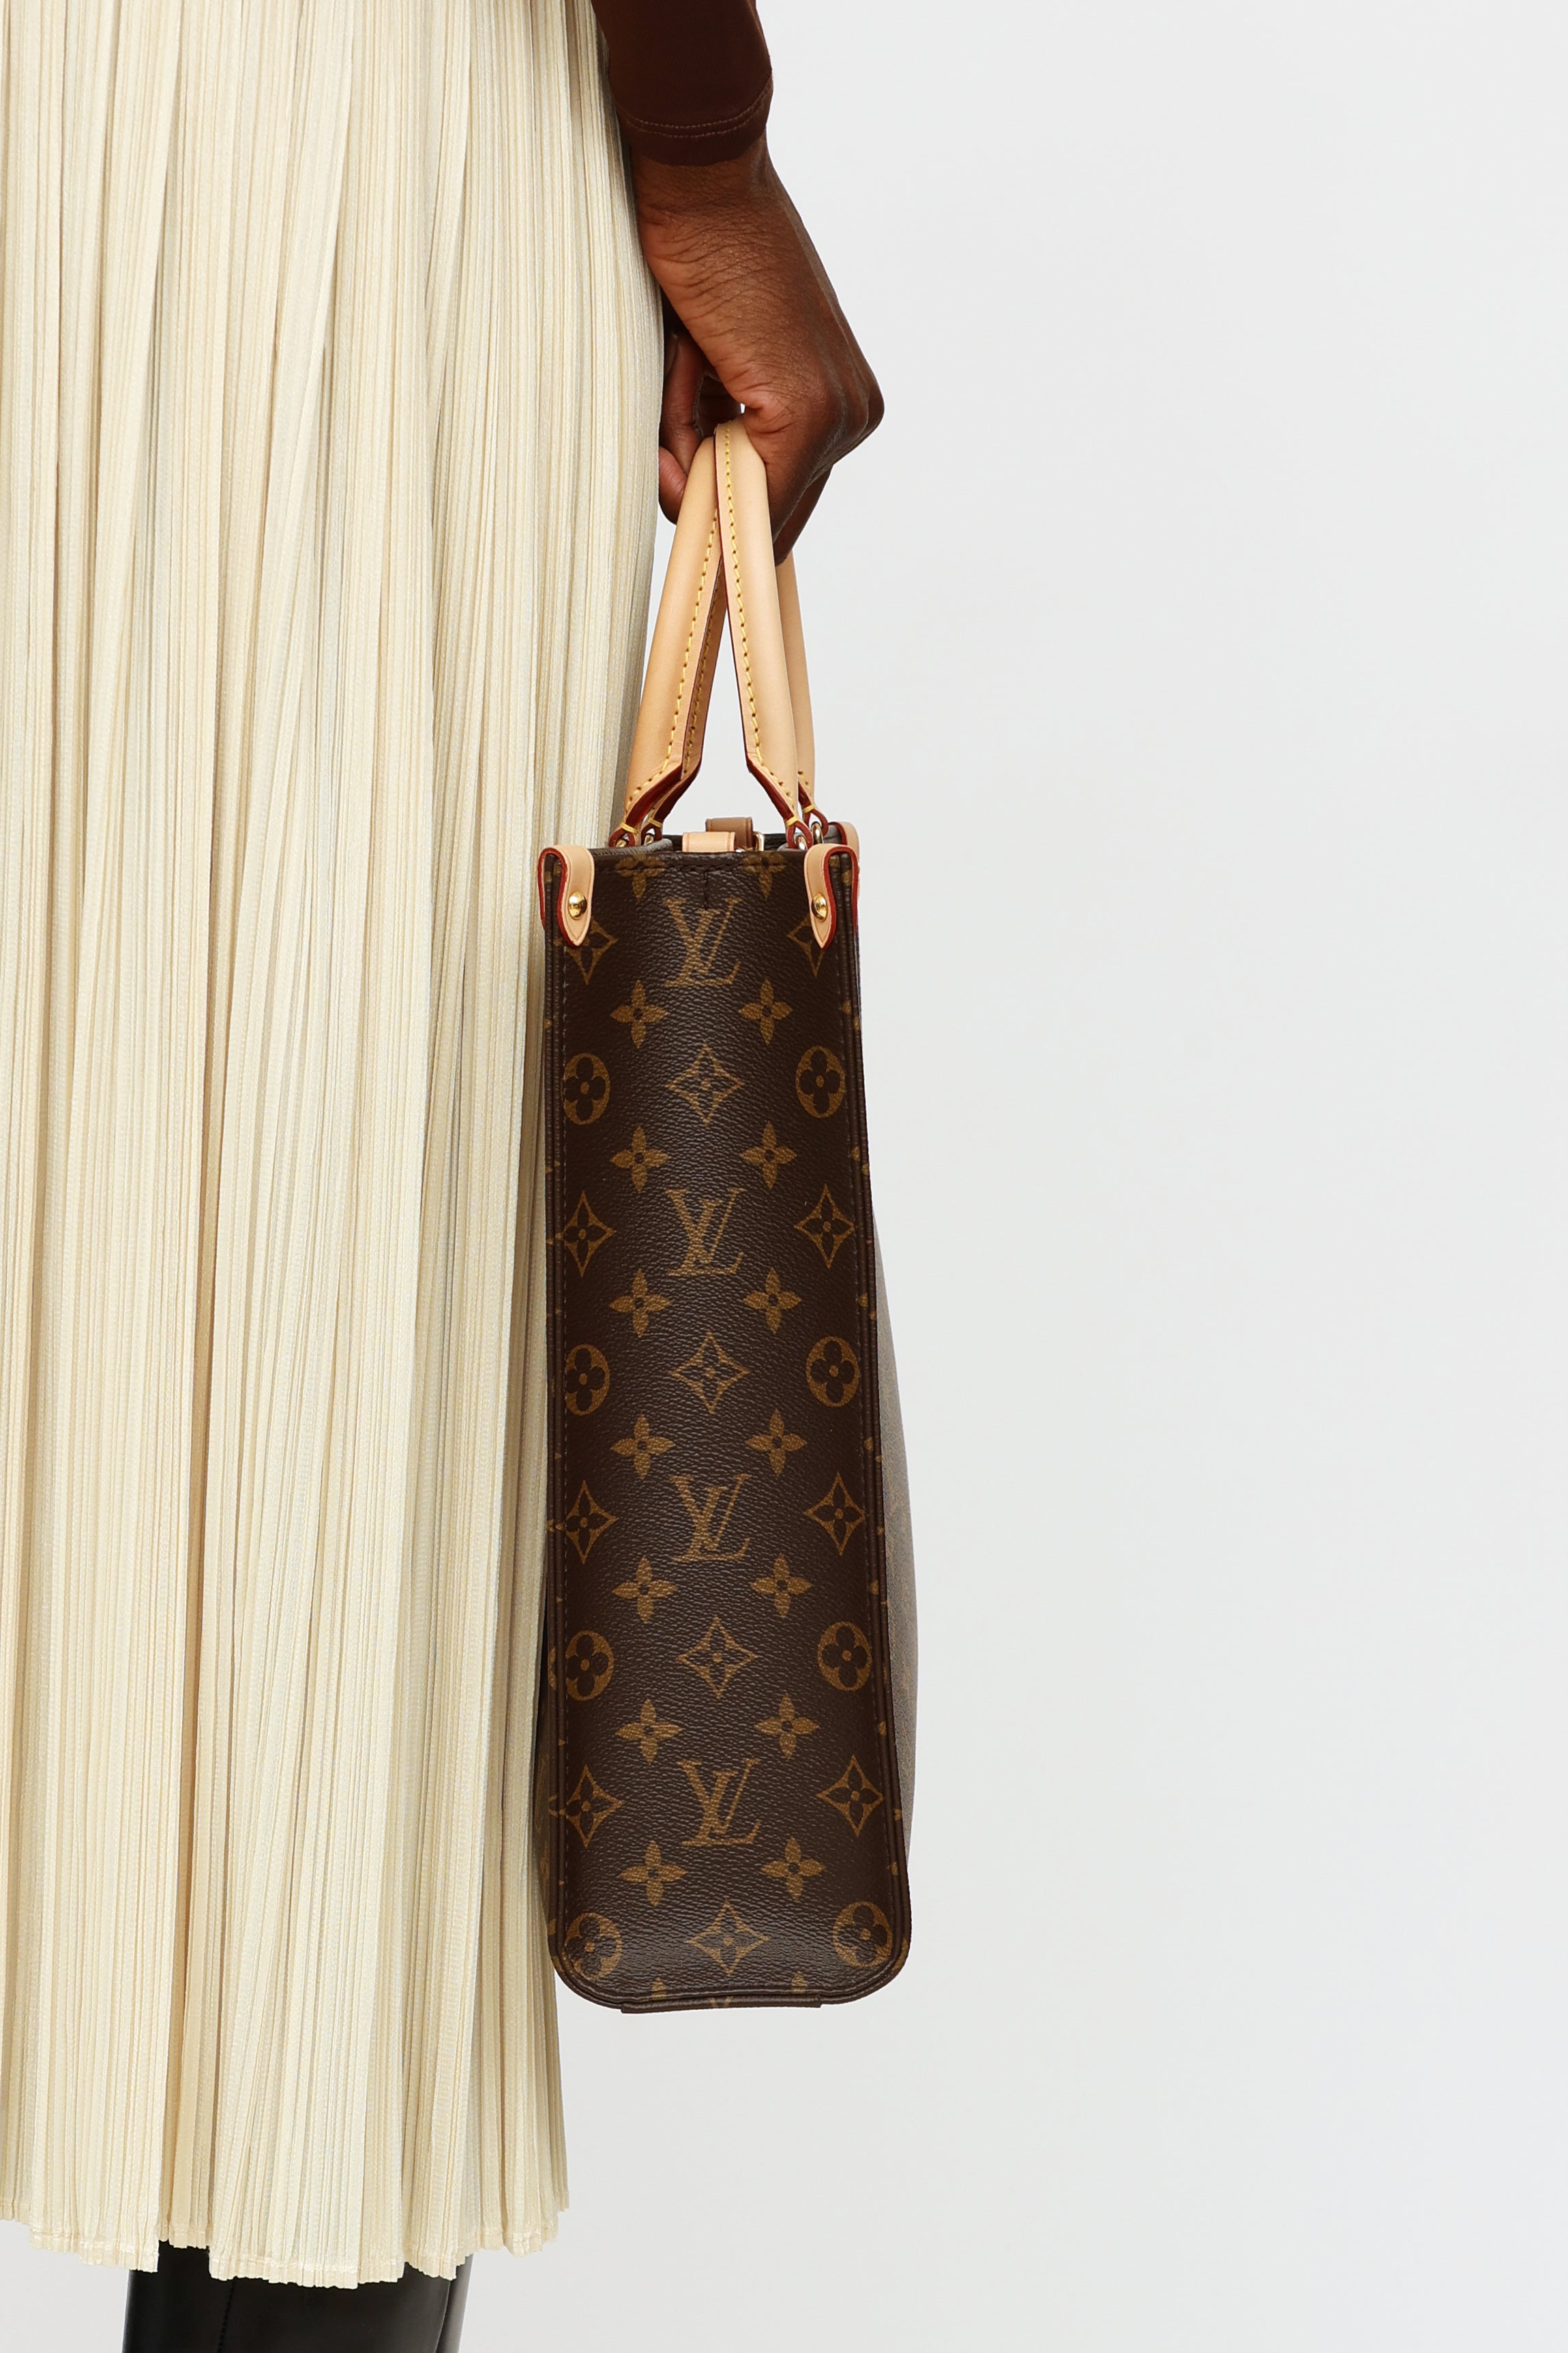 Louis Vuitton Brown Monogram Coated Canvas Petit Sac Plat Gold Hardware,  2020 Available For Immediate Sale At Sotheby's